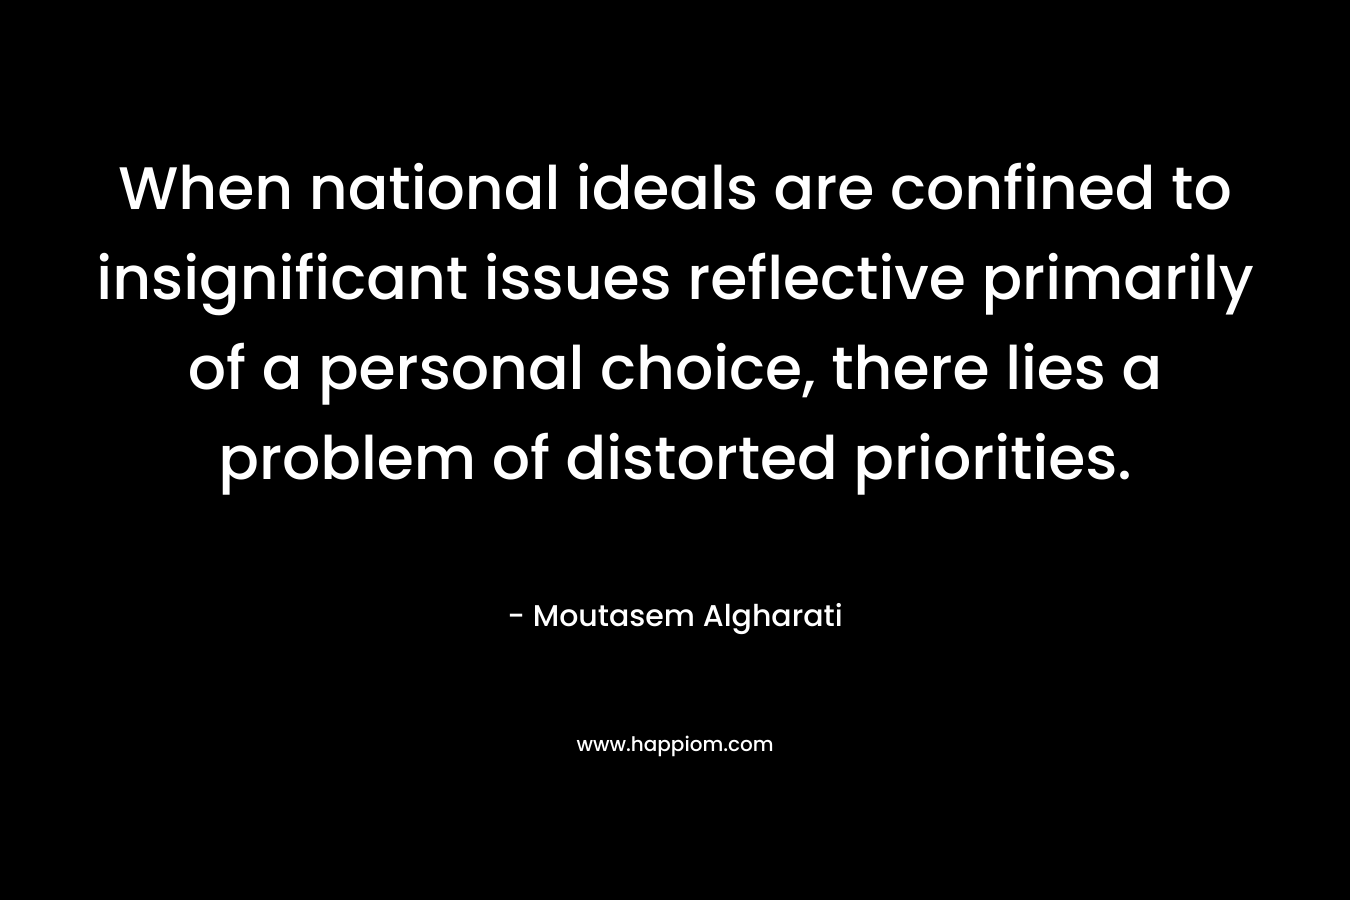 When national ideals are confined to insignificant issues reflective primarily of a personal choice, there lies a problem of distorted priorities.